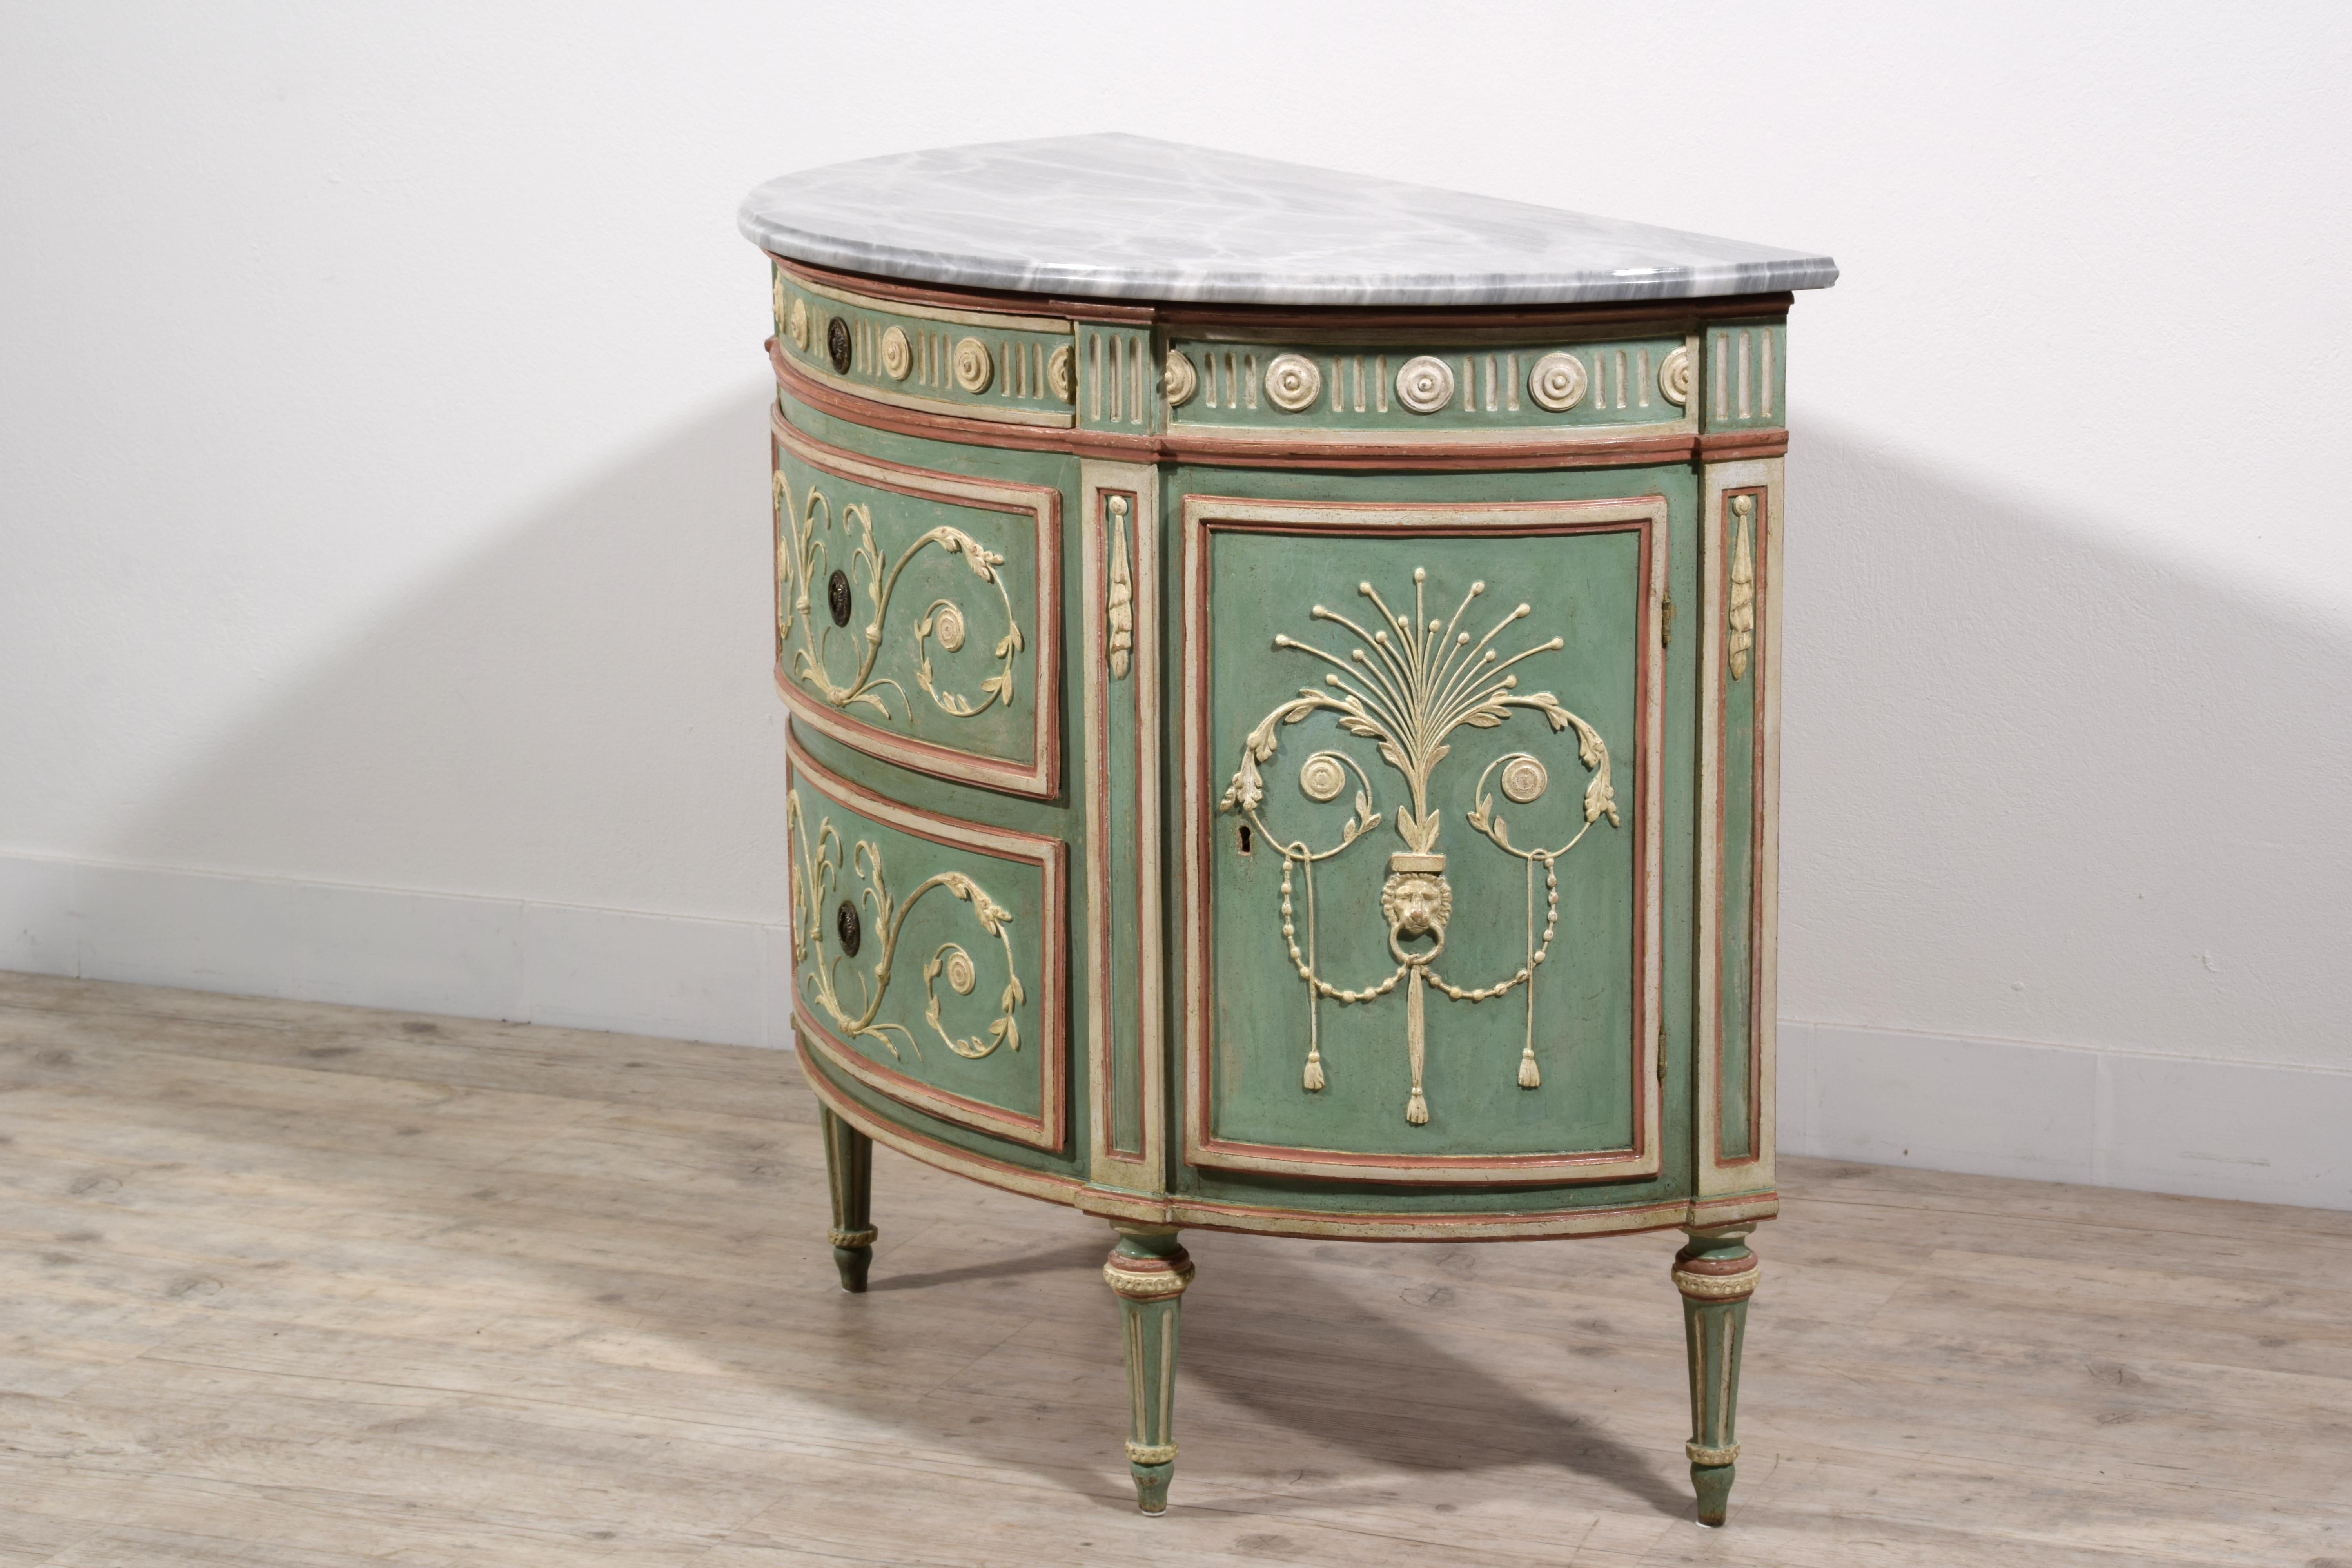 18th century, Italian Half-moon Lacquered Wood Chest of Drawers For Sale 8